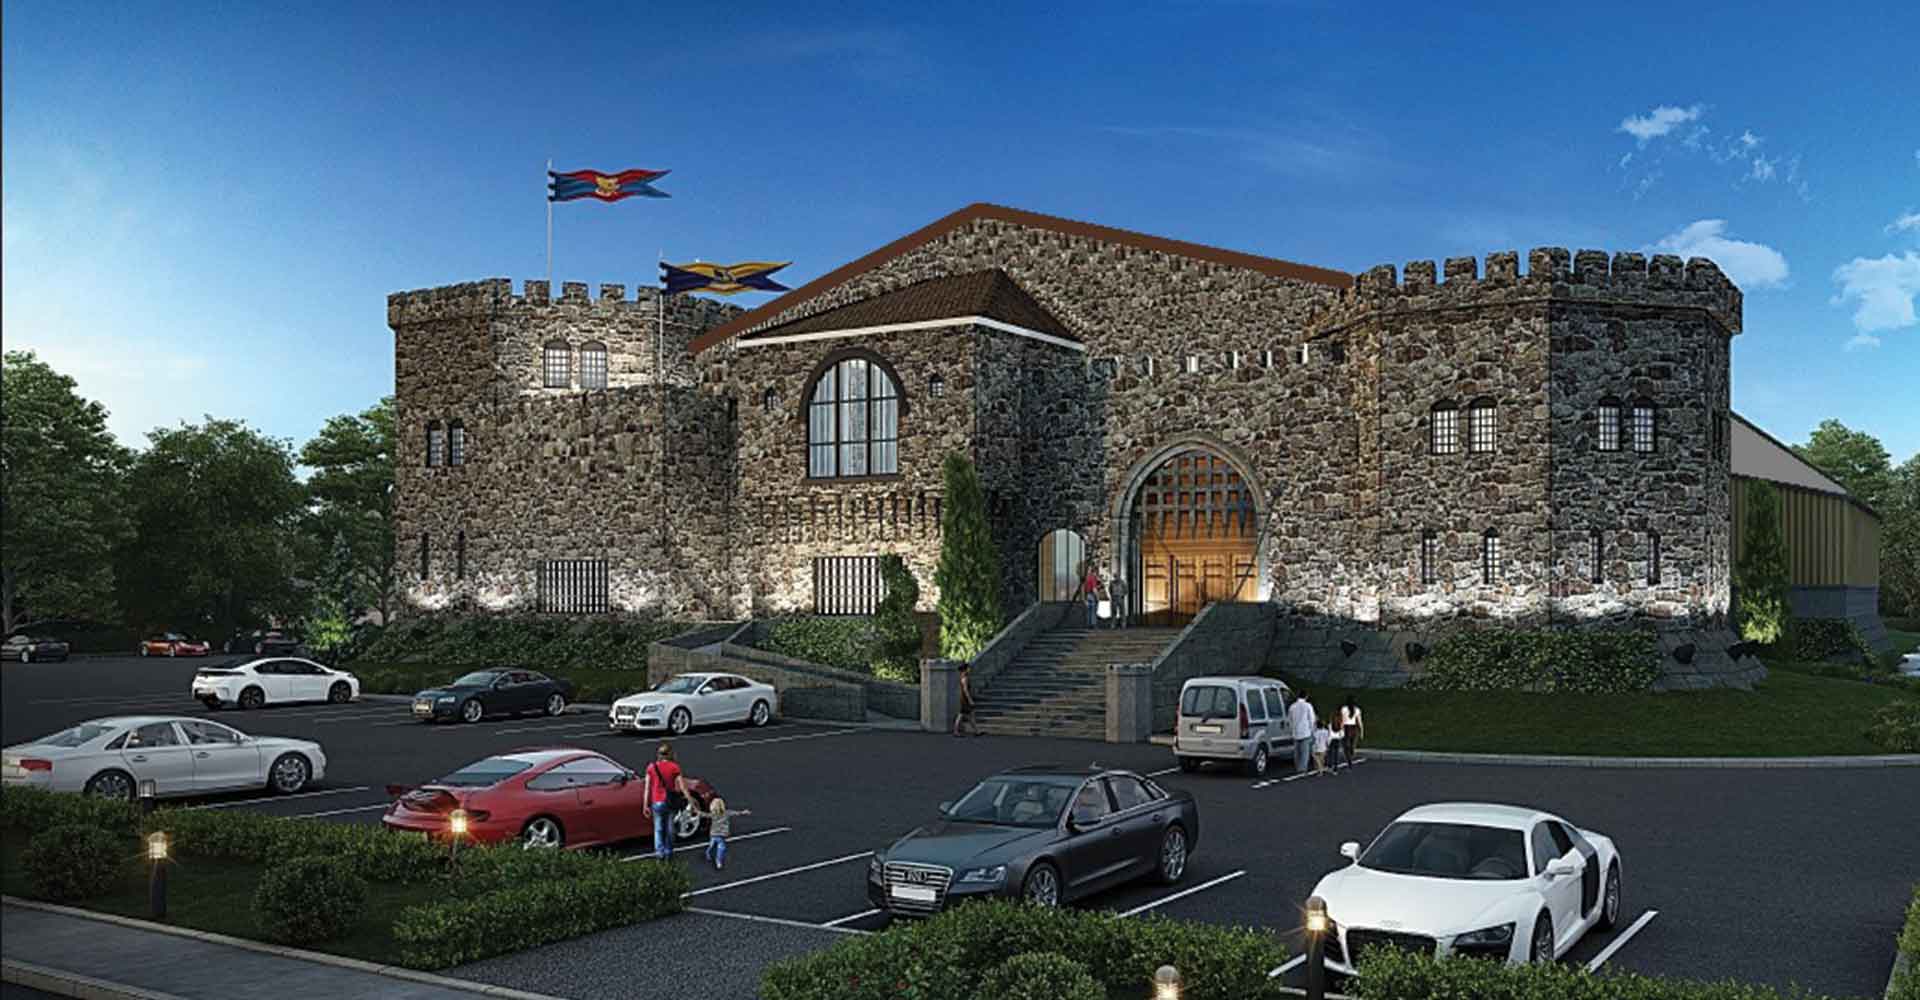 Swansea's Silver Stone Castle is months away from opening. Here's what you need to know.